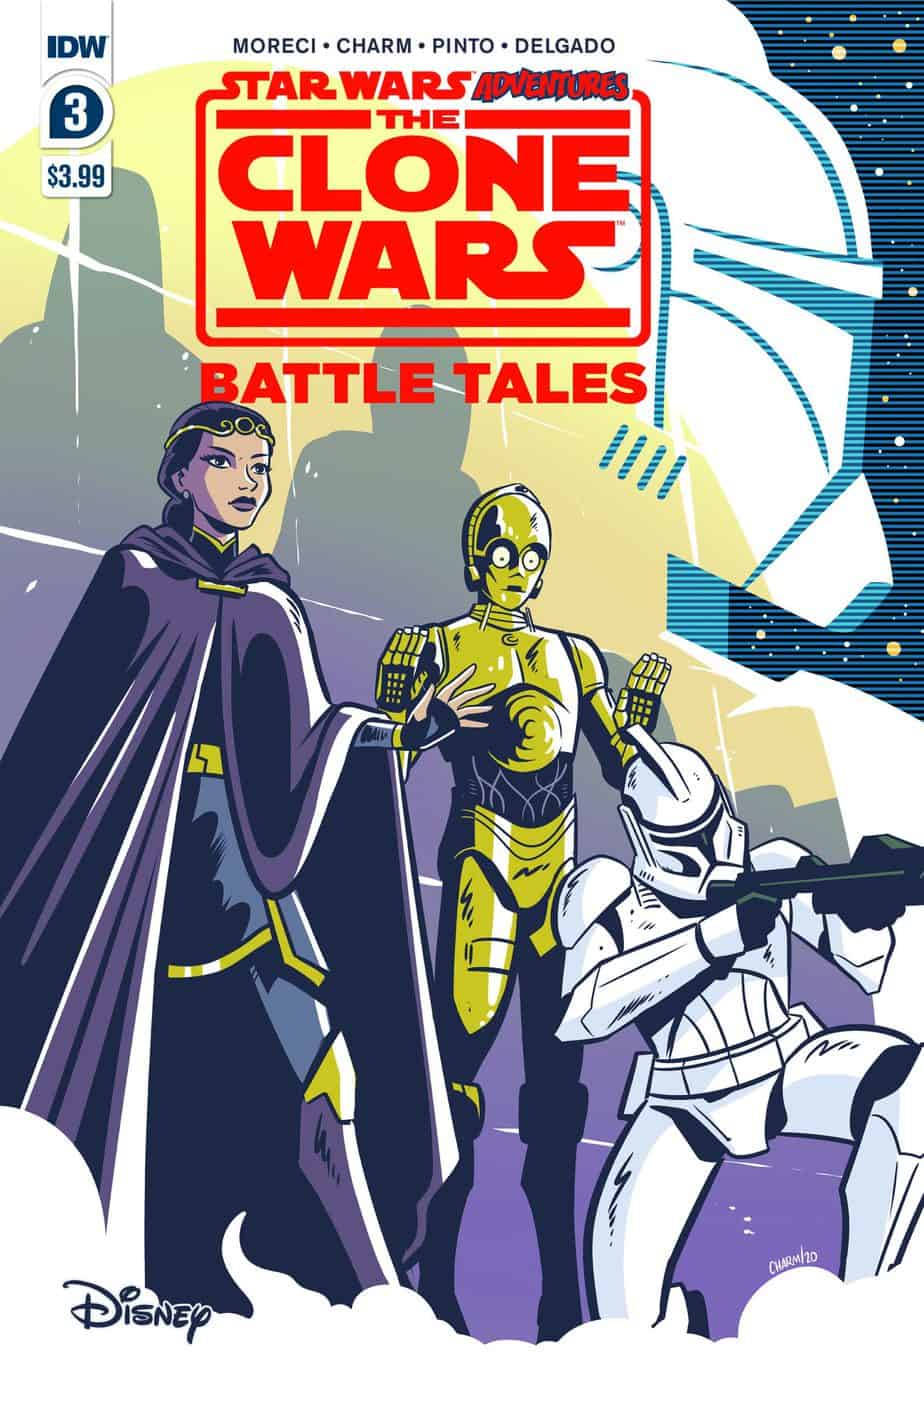 STAR WARS ADVENTURES: CLONE WARS - Battle Tales #3 - Cover A